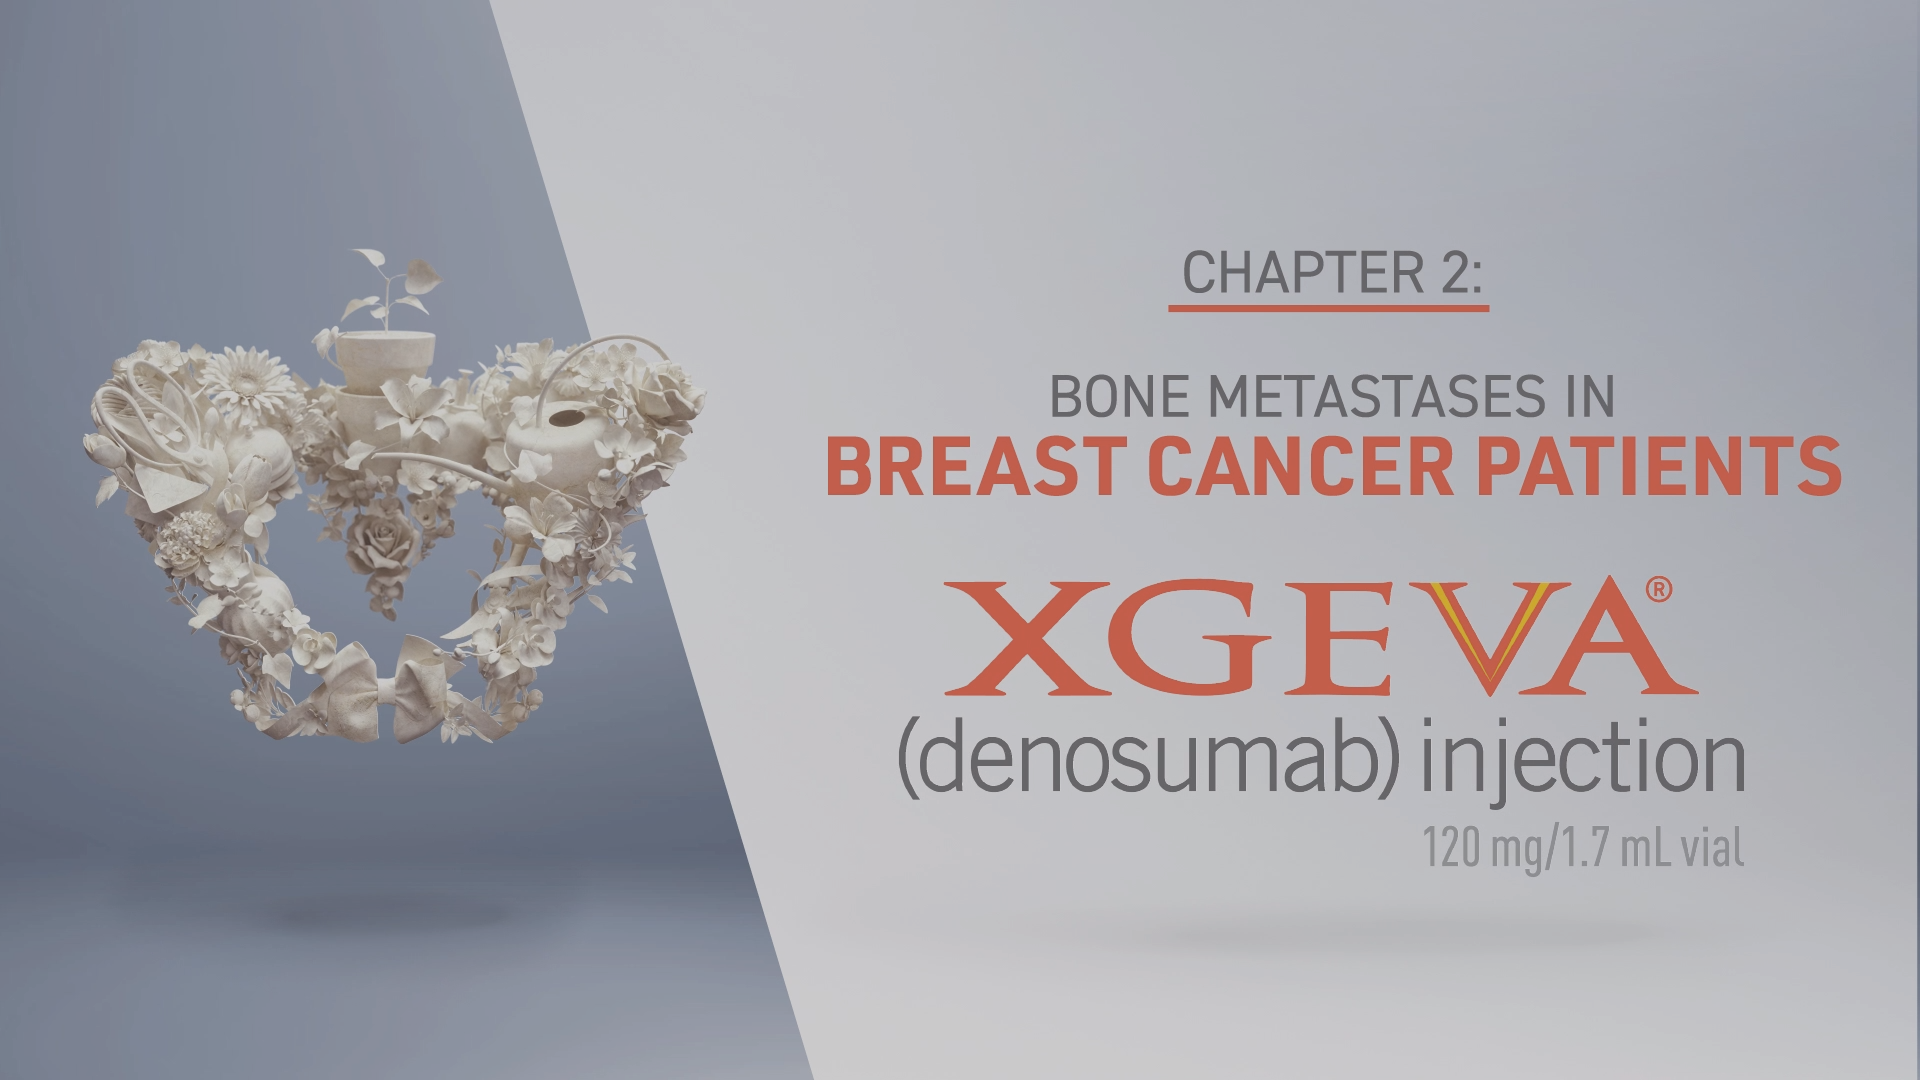 Chapter one: Watch a video about how Dr. Berenson uses XGEVA® with his Multiple Myeloma Patients